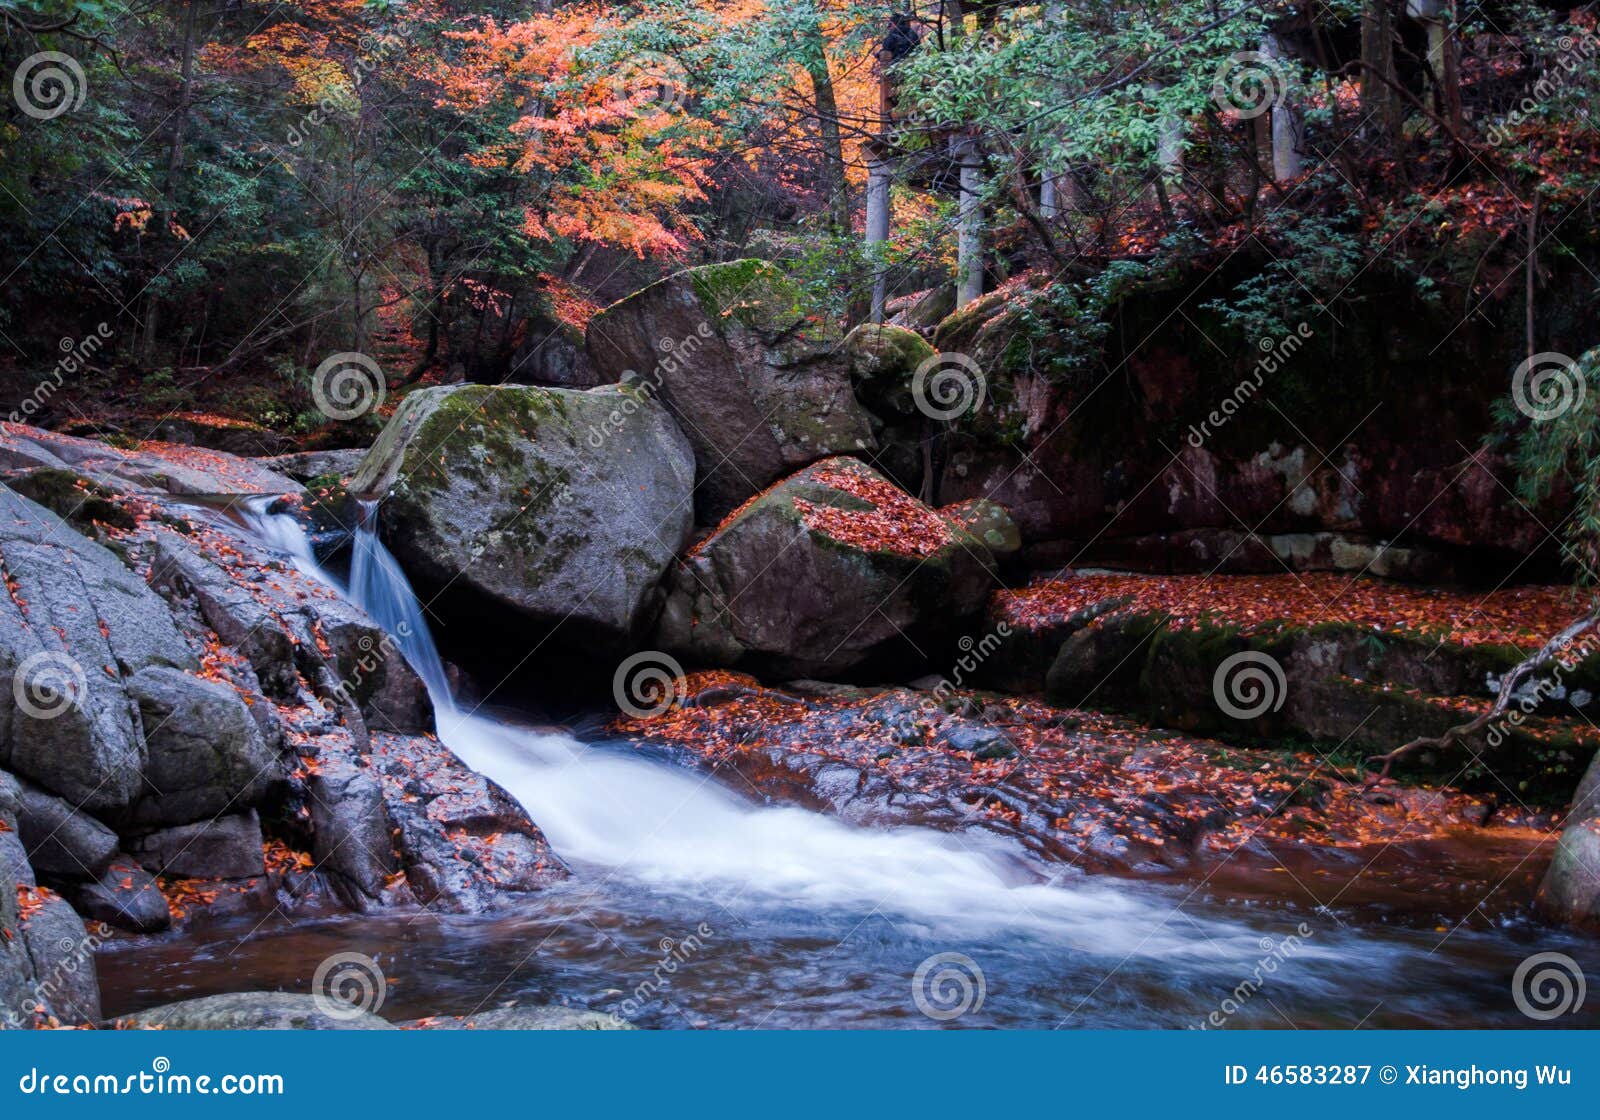 waterfall and red autumn leaves